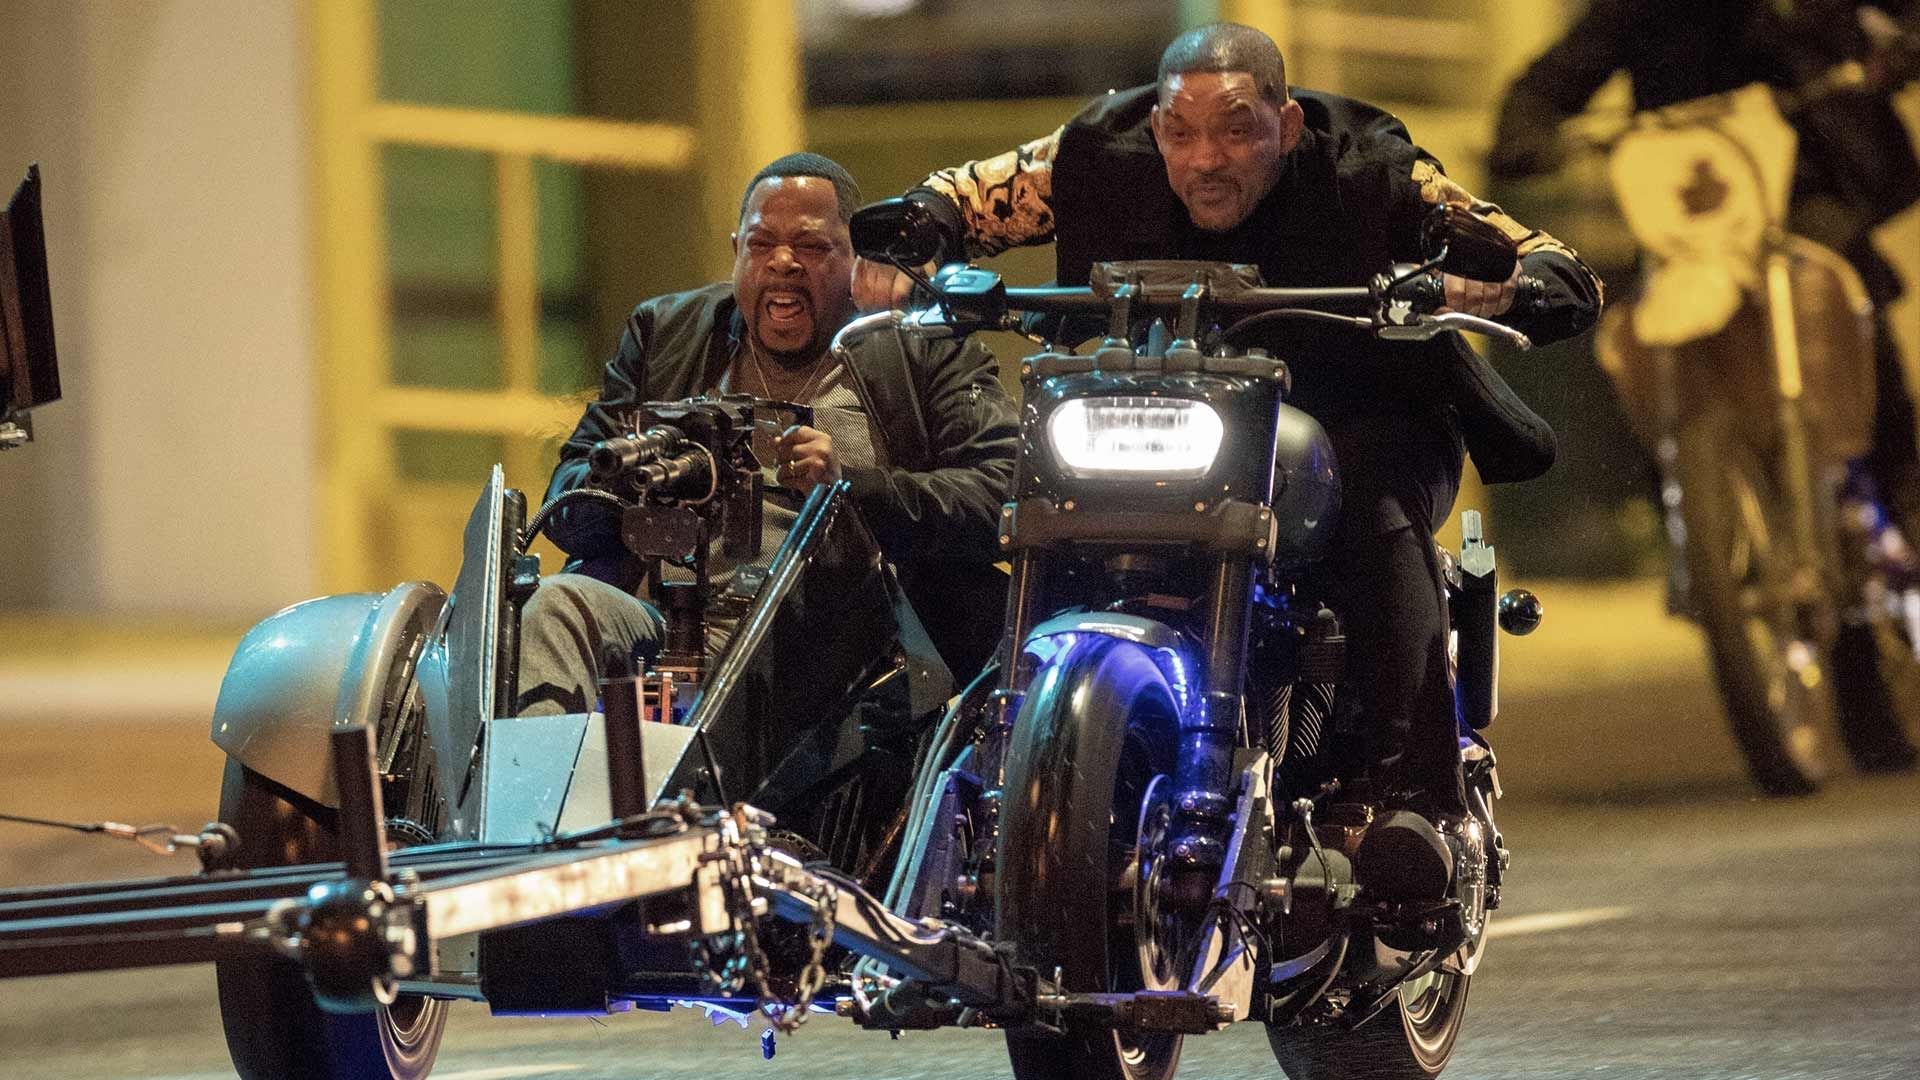 Bad Boys for Life - Film Review